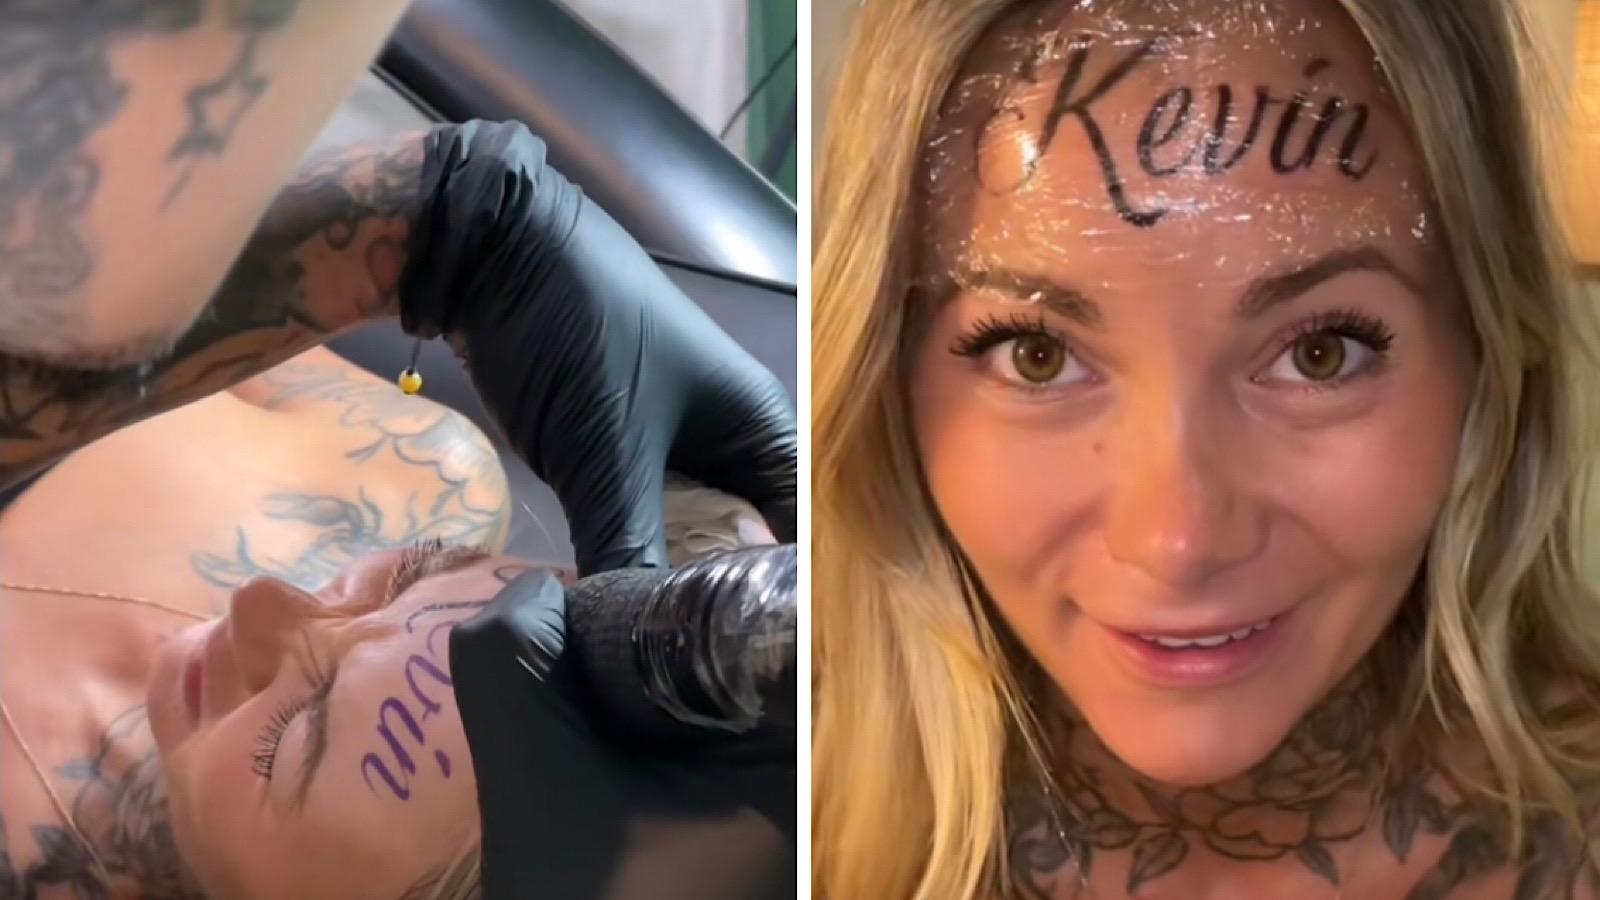 tiktok doesn't believe that a woman tattooed her boyfriend's name on her face